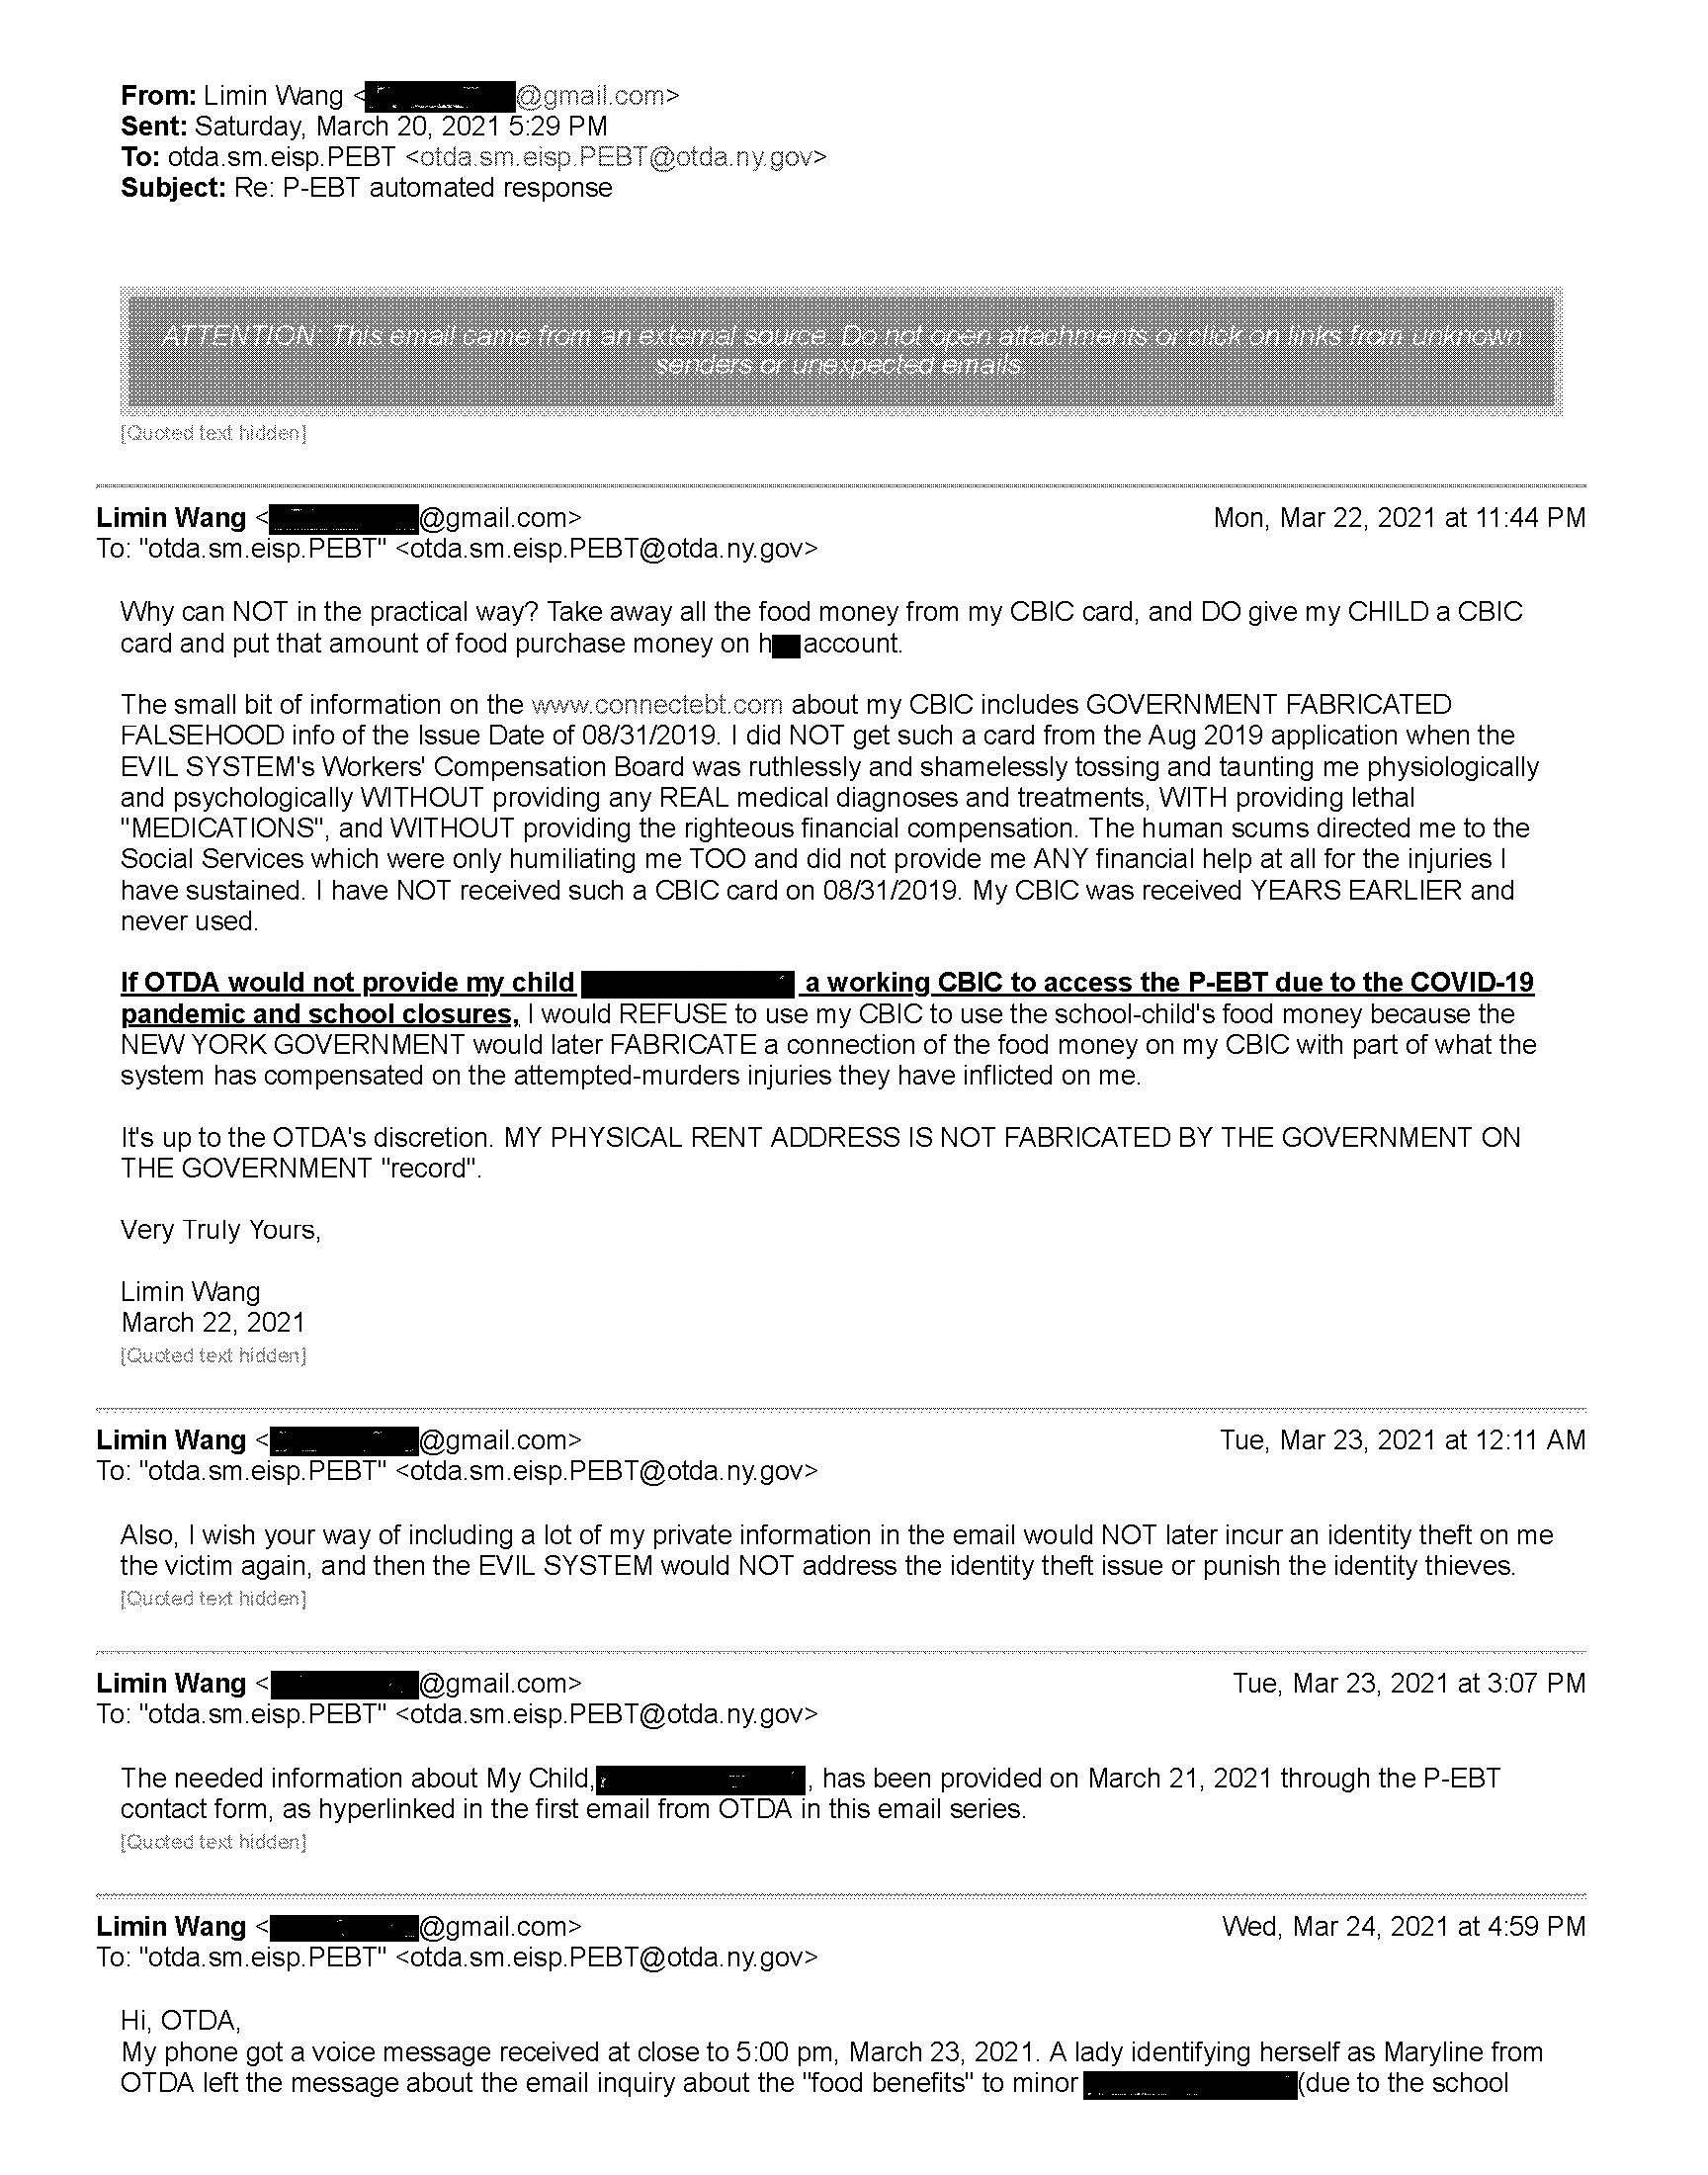 My replies to P-EBT automated response Mar 19 to 25 modified p3of5.jpg